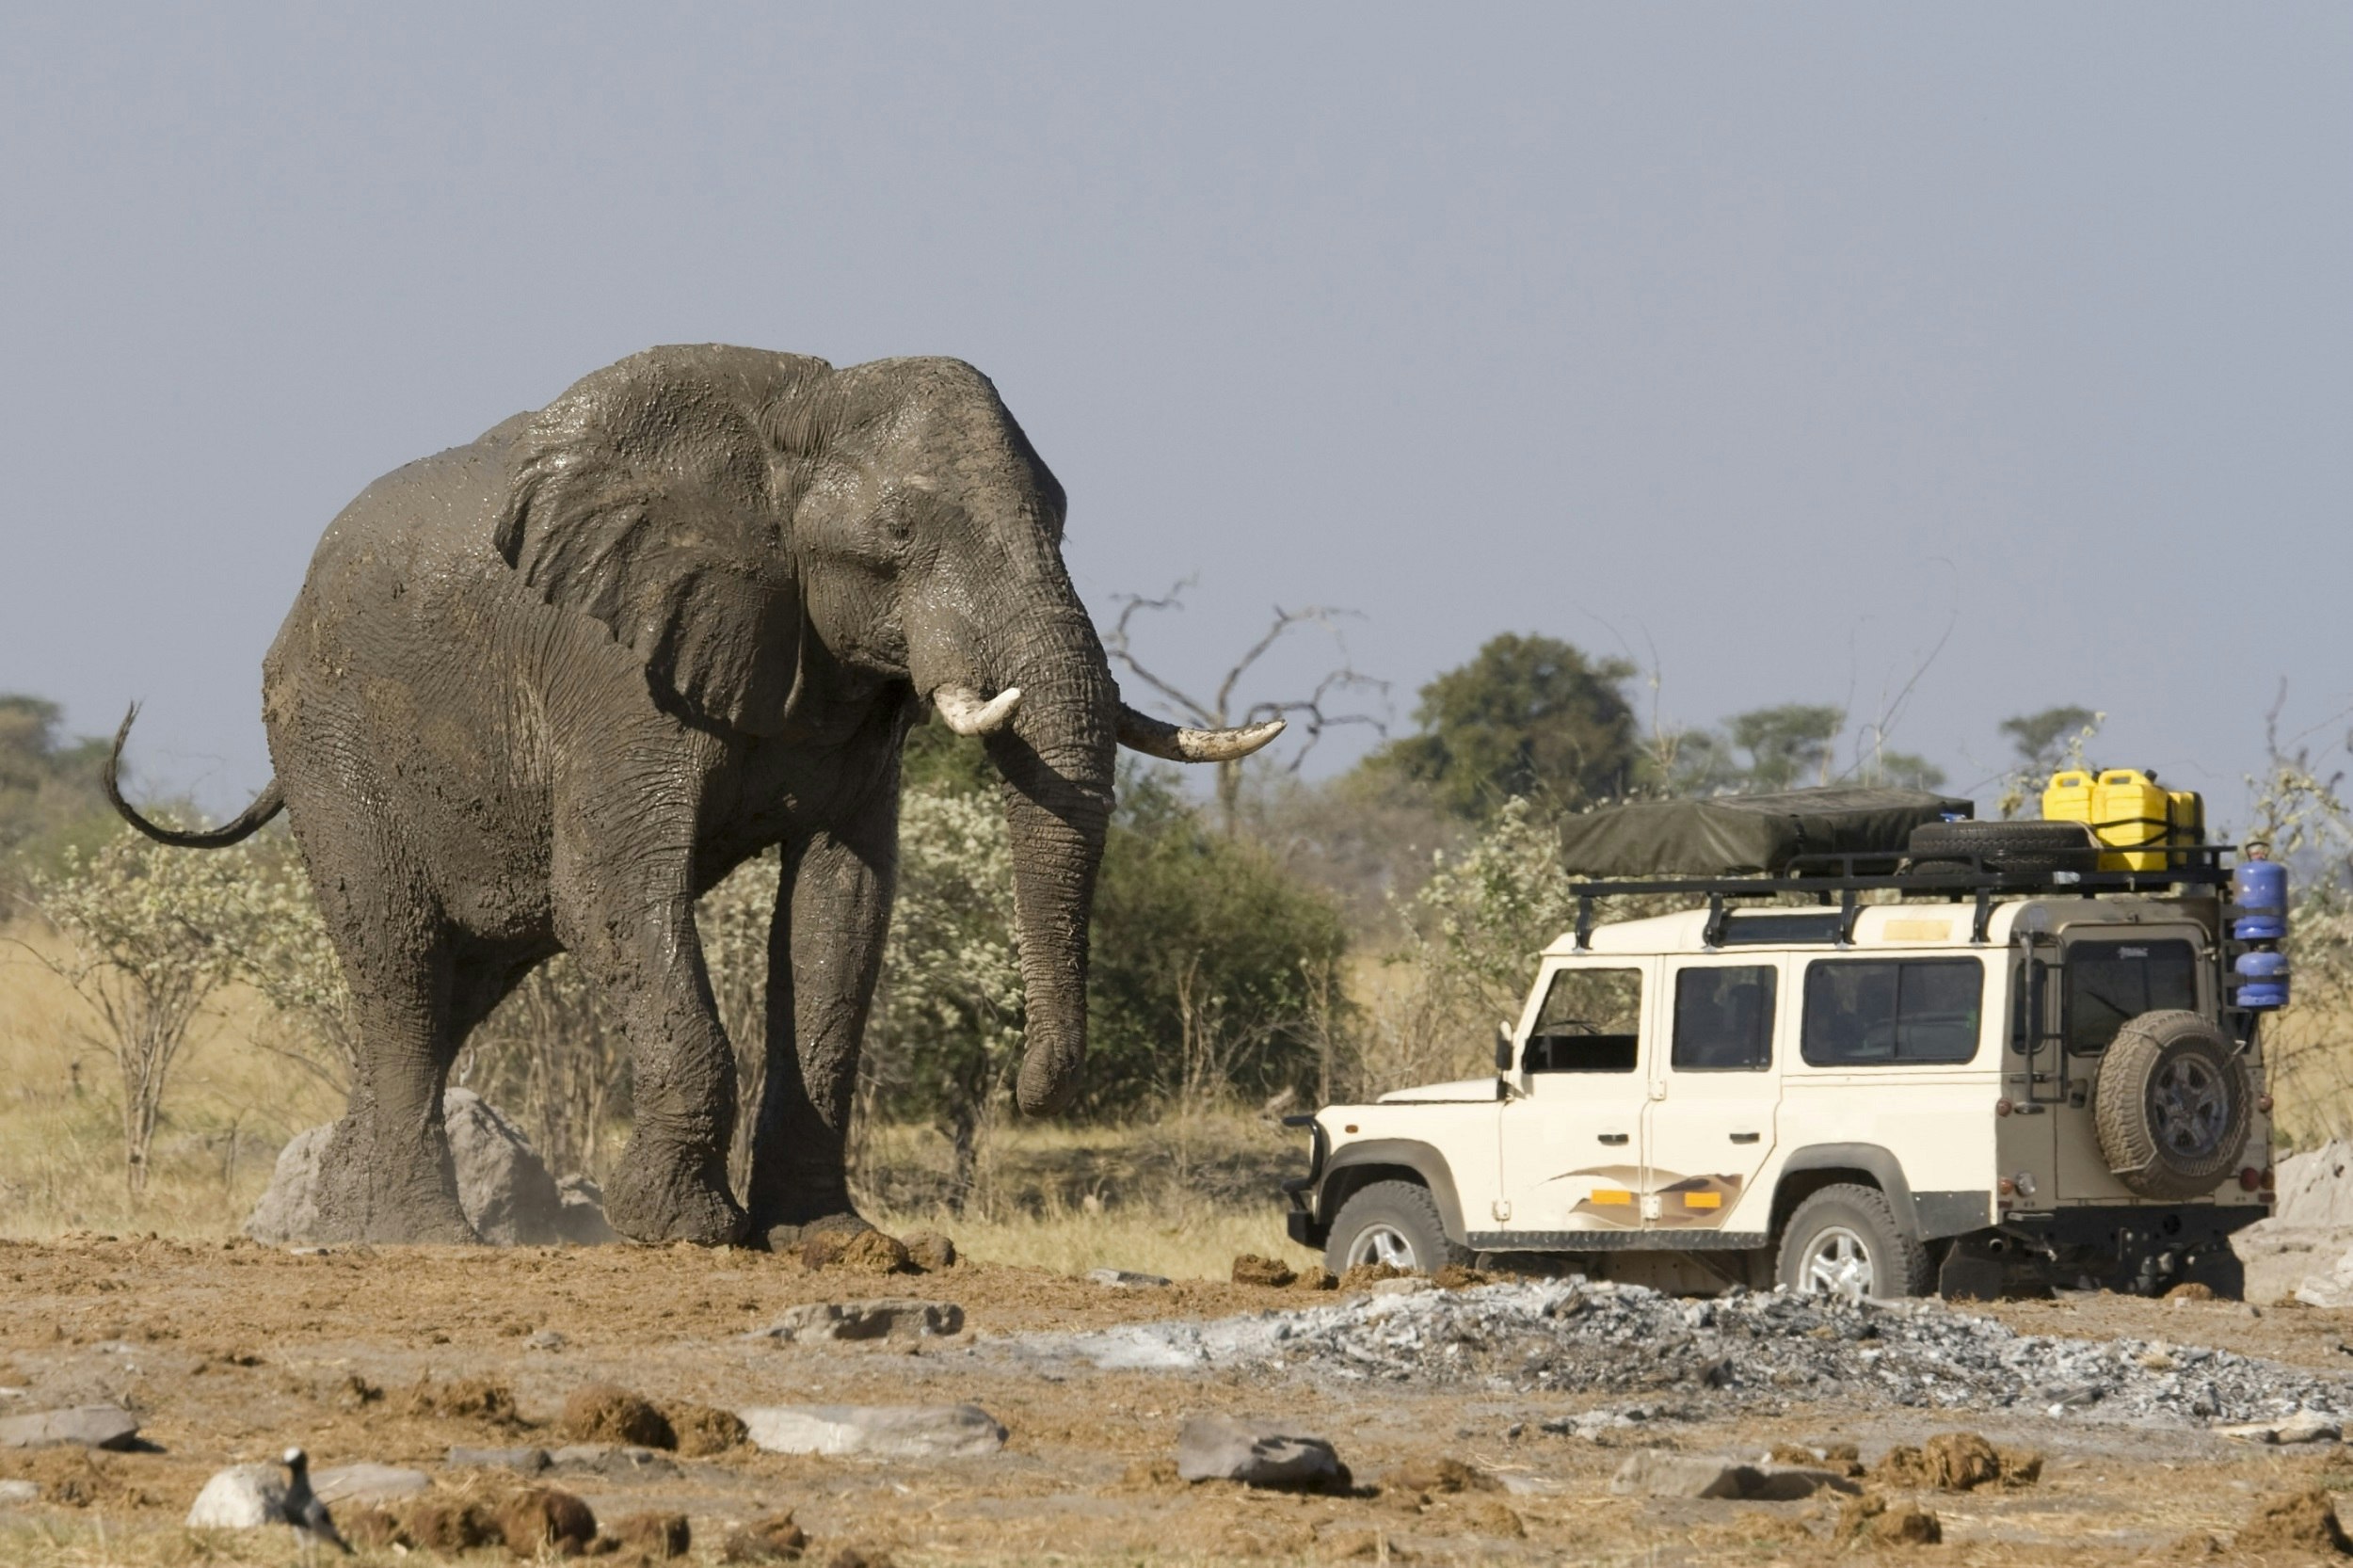 A Land Rover Defender 4WD is stopped on a dusty savannah covered with elephant dung; in front of the vehicle, and towering over it, is an absolutely gargantuan elephant (its legs are taller than the vehicle).